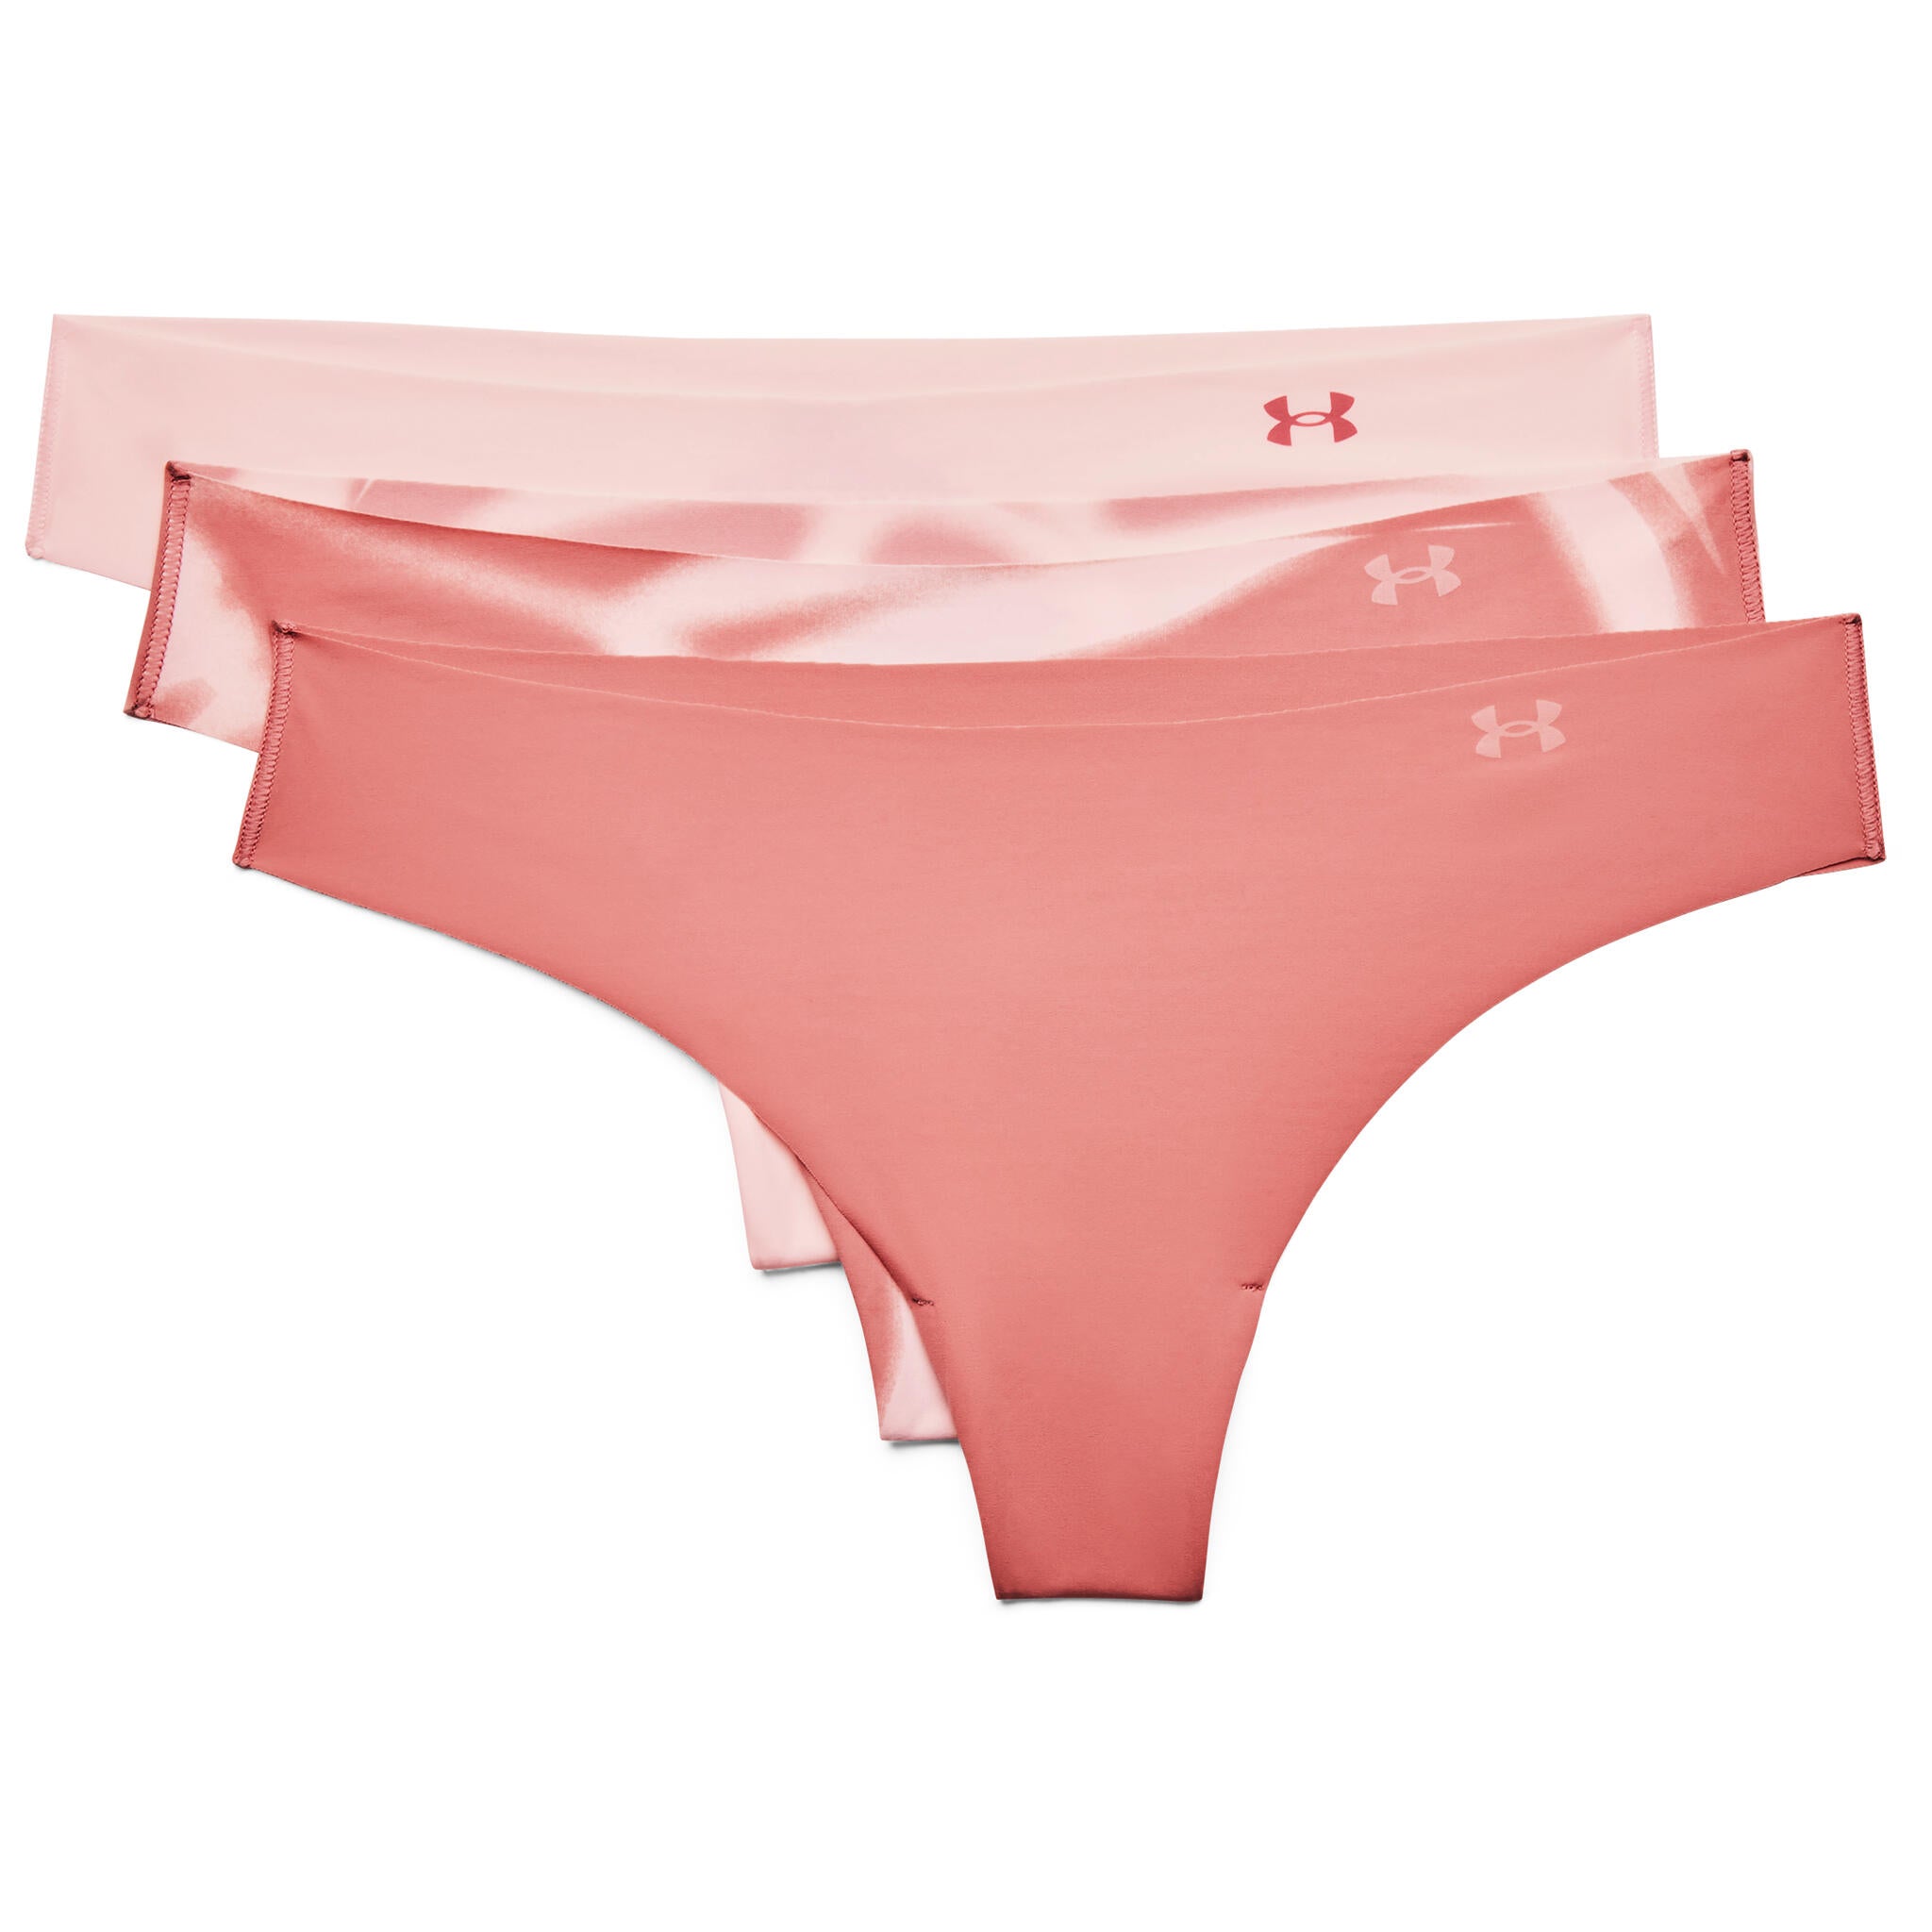 UNDER ARMOUR Women's Pure Stretch Sheer Novelty Thong - Bob's Stores